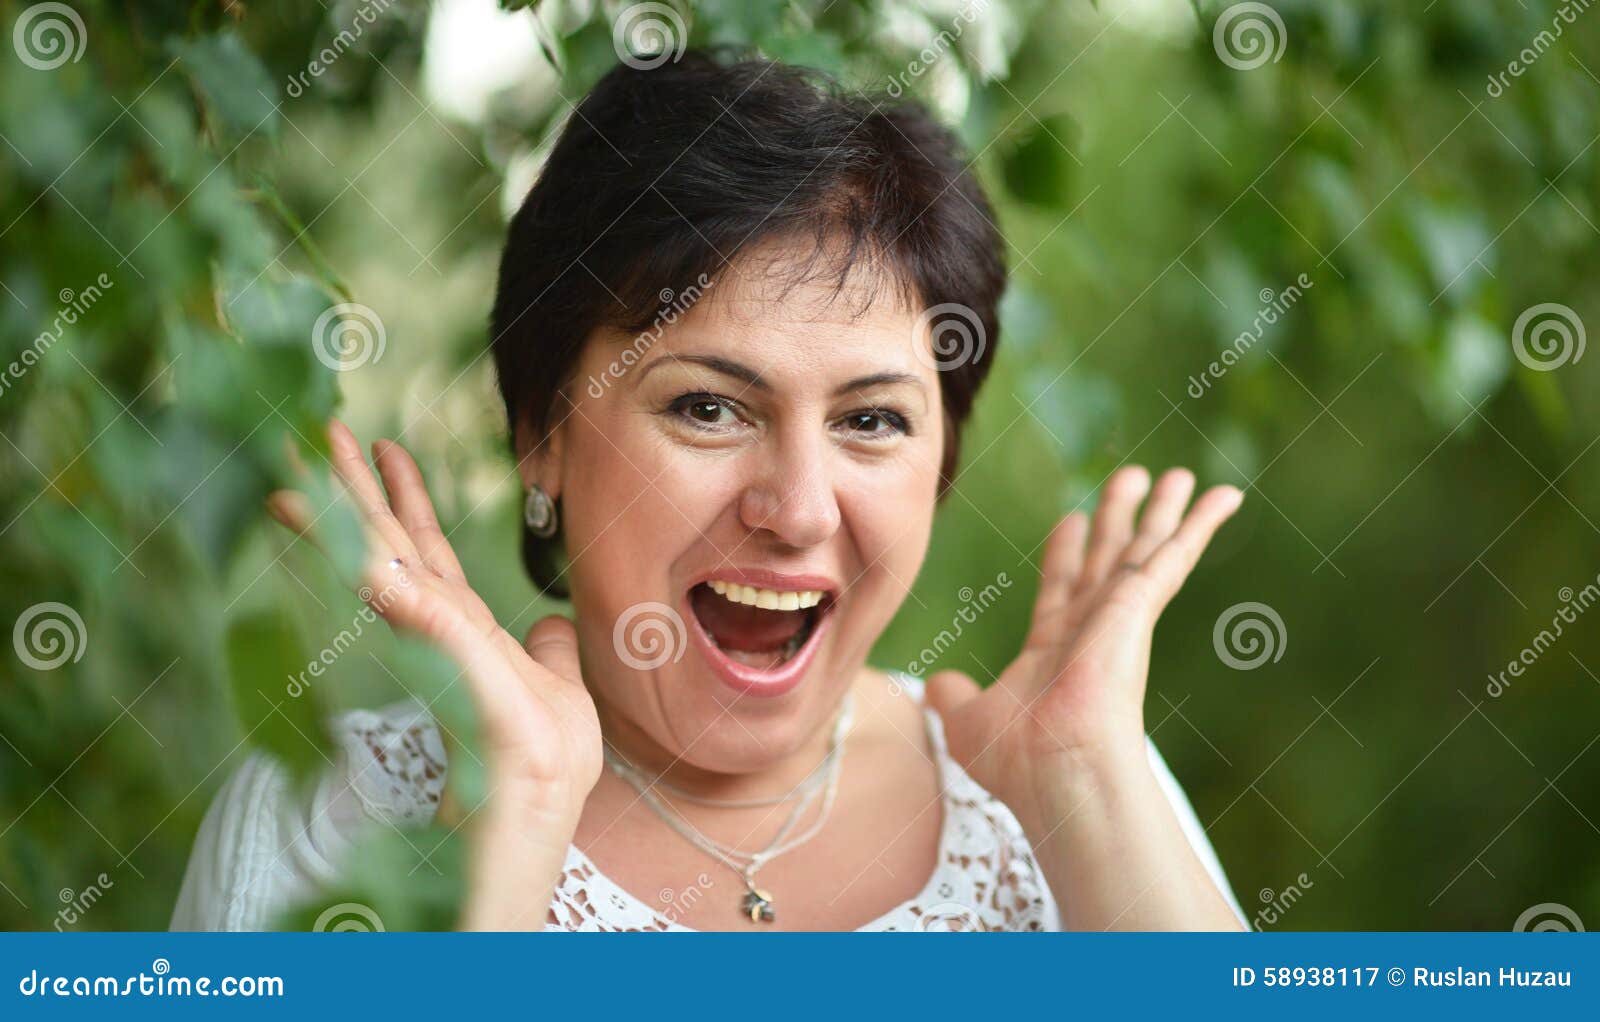 Mature Lady Surprised At Summer Stock Image Image